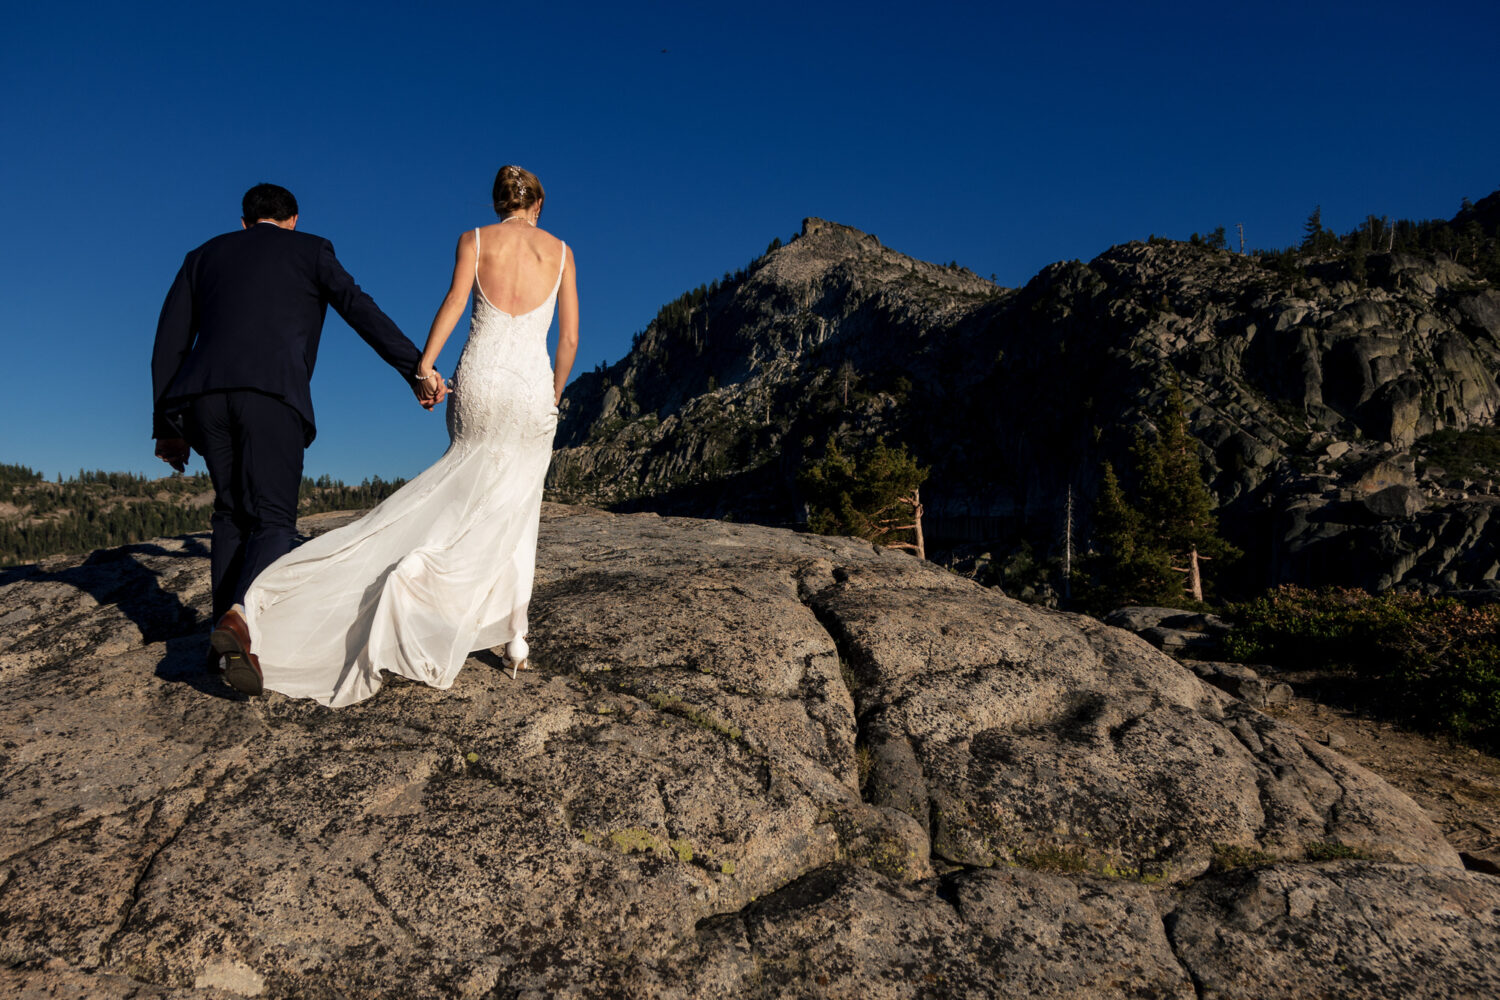 Couple wedding portraits at Donner Summit.